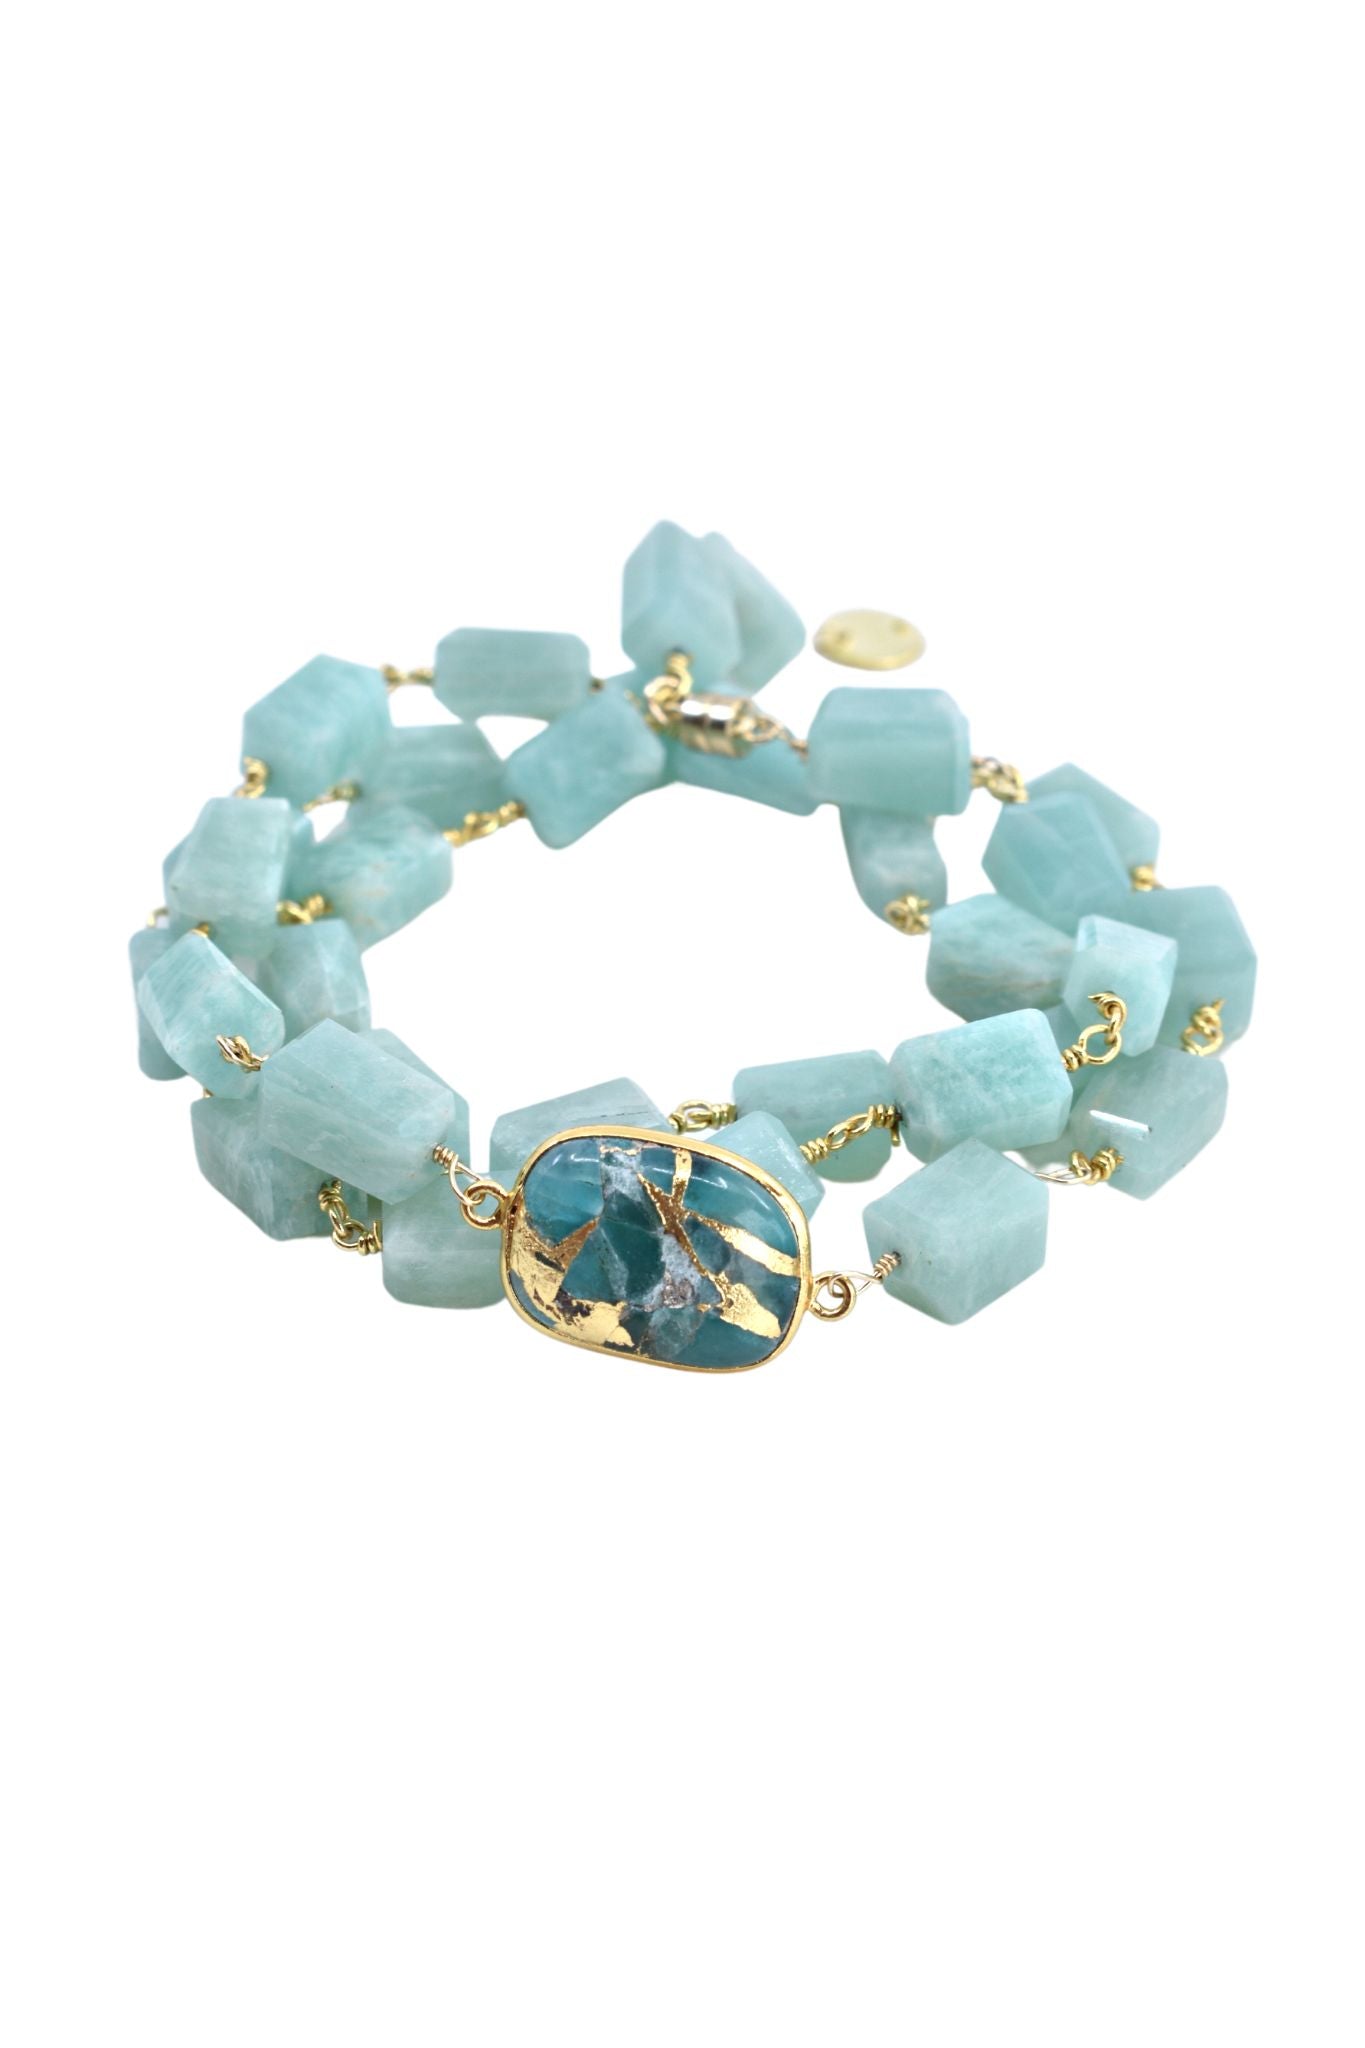 Hana Wrap Bracelet/Necklace in Teal Mojave Copper Turquoise - Chunky Stone